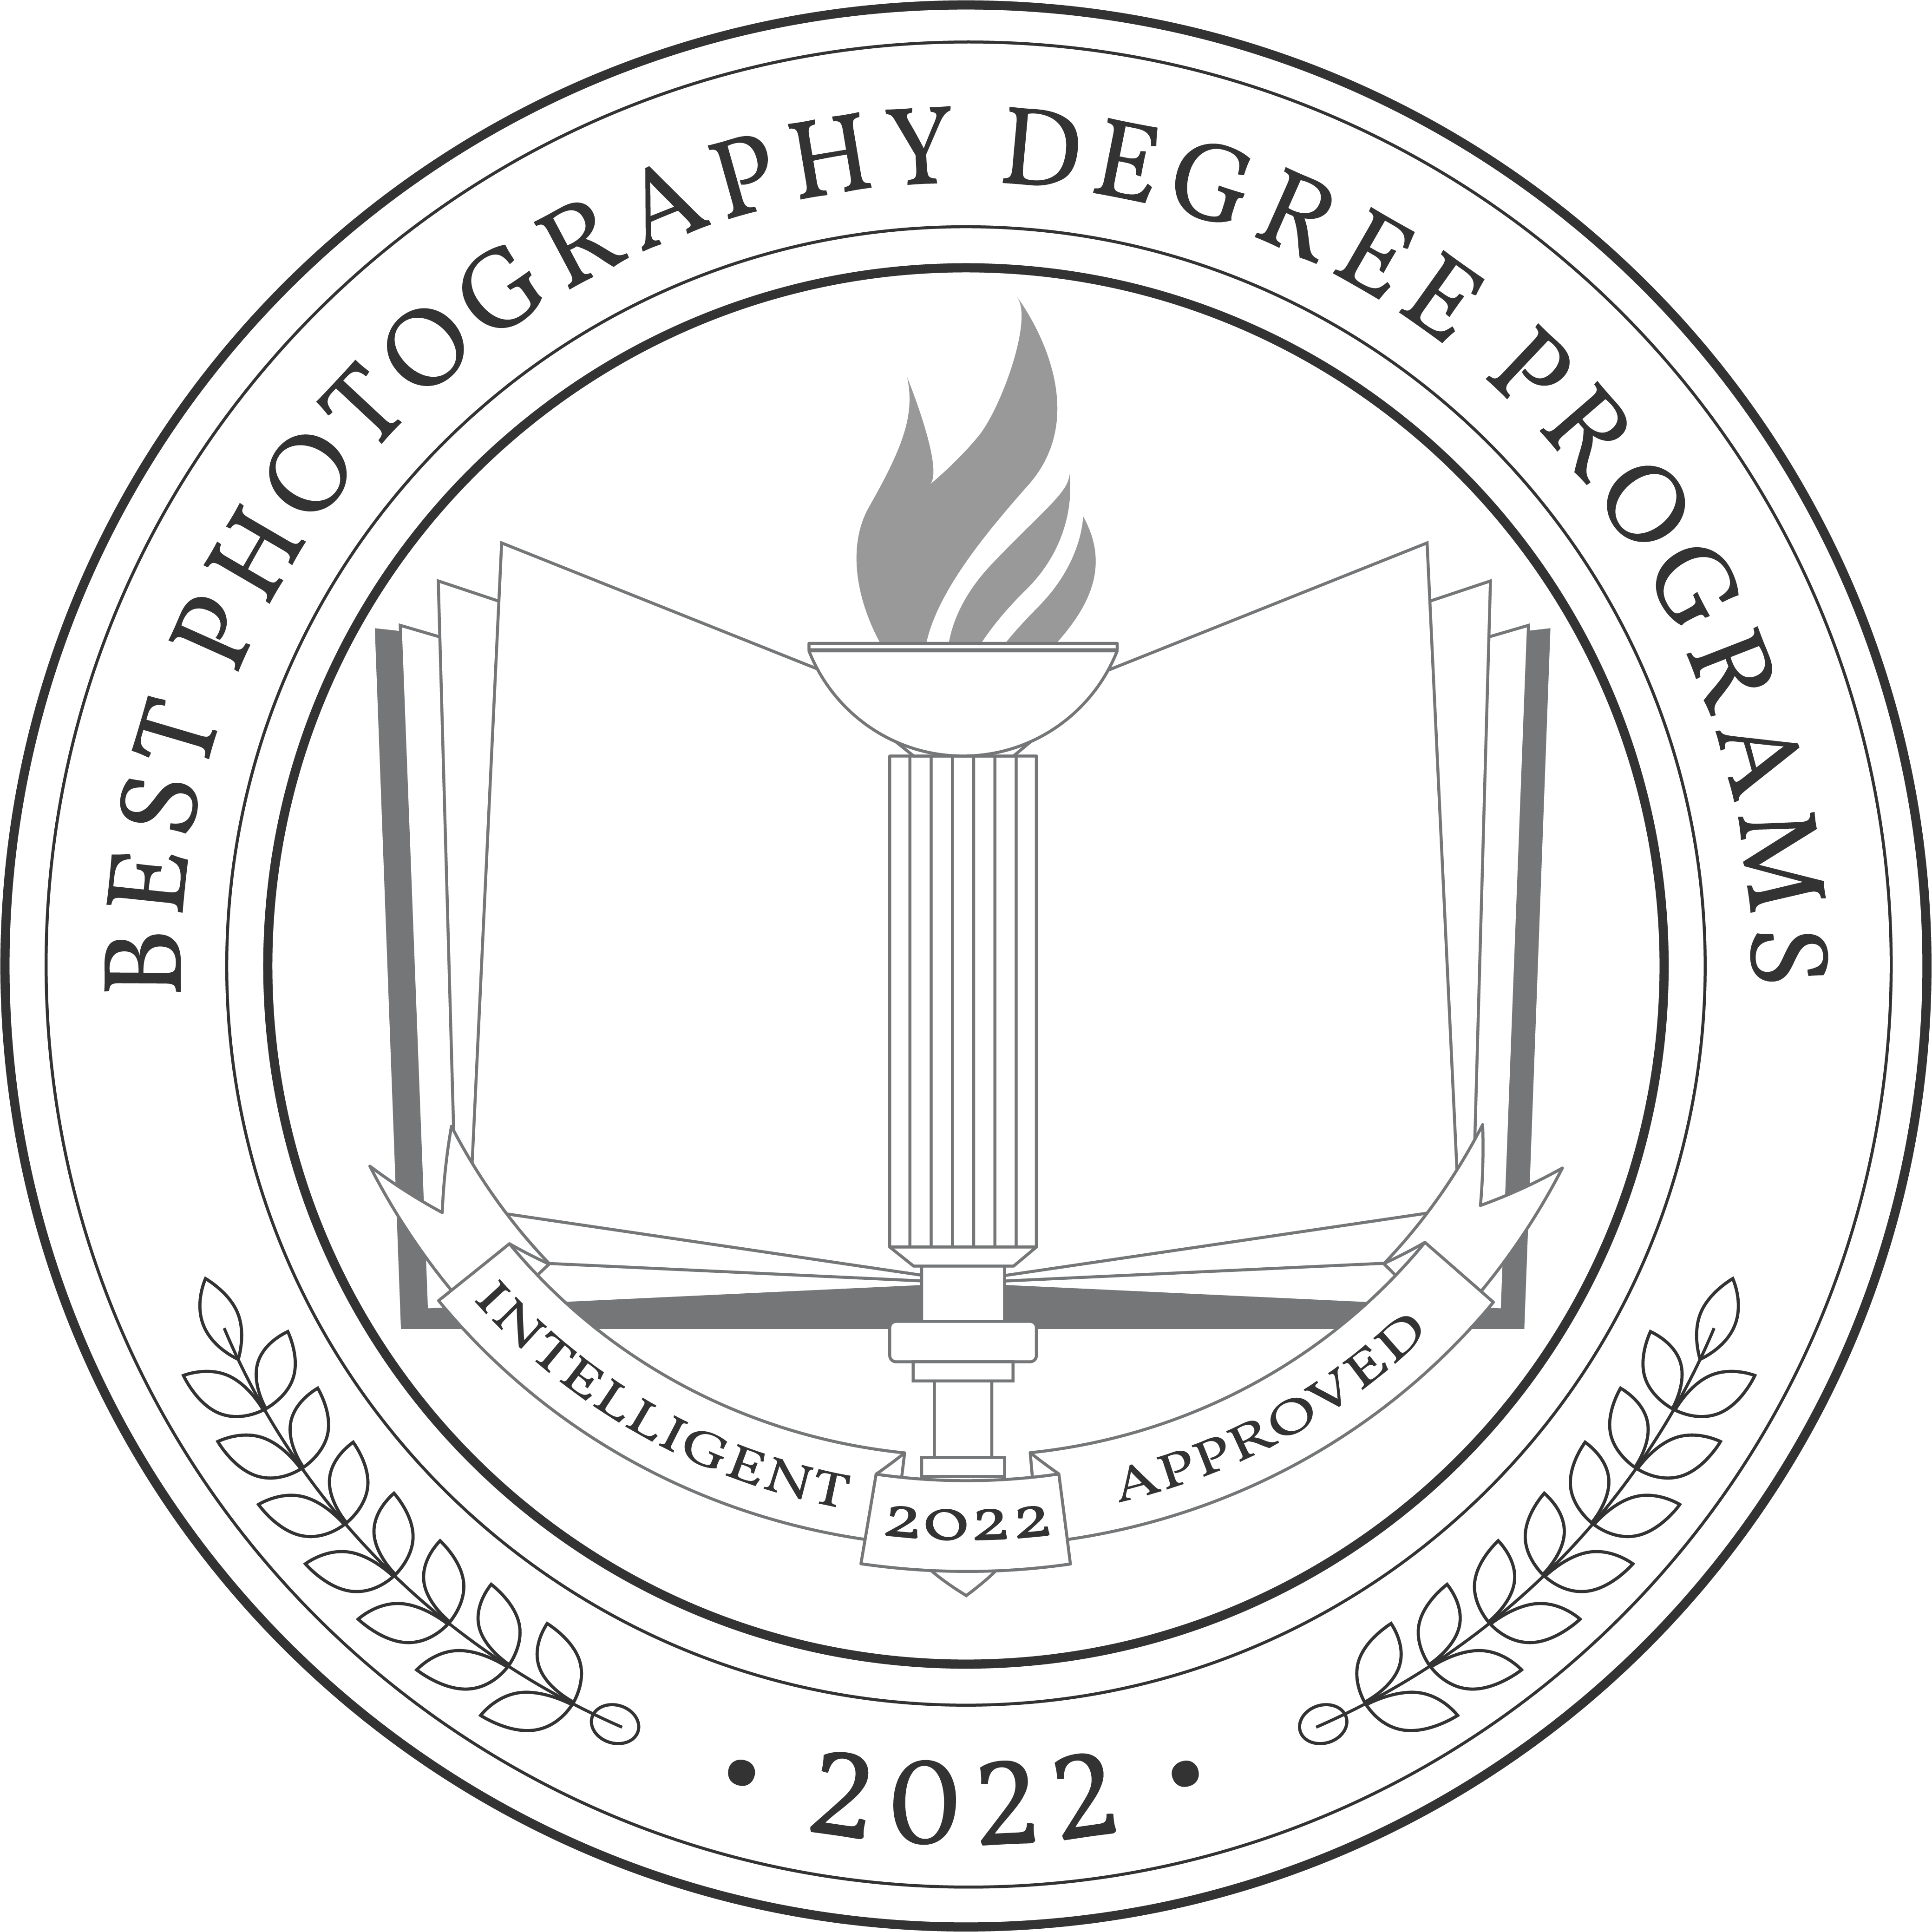 Best-Photography-Degree-Programs-Badge.png